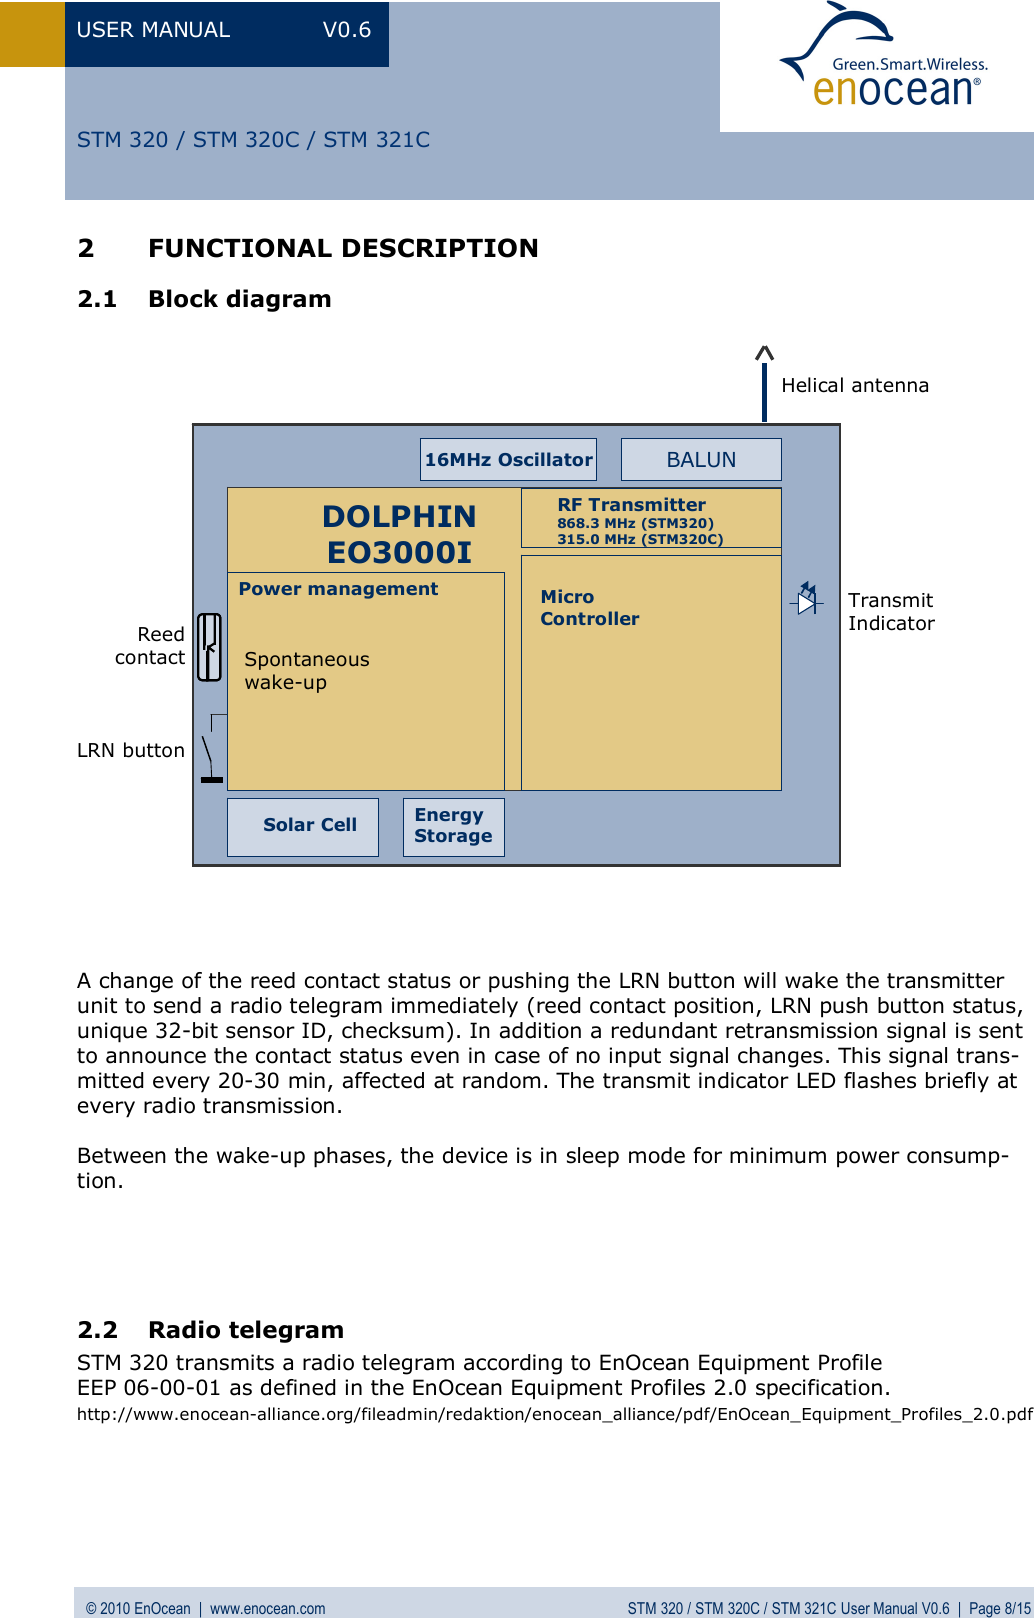 USER MANUAL V0.6 © 2010 EnOcean  |  www.enocean.com STM 320 / STM 320C / STM 321C User Manual V0.6  |  Page 8/15  STM 320 / STM 320C / STM 321C 2 FUNCTIONAL DESCRIPTION 2.1 Block diagram      A change of the reed contact status or pushing the LRN button will wake the transmitter unit to send a radio telegram immediately (reed contact position, LRN push button status, unique 32-bit sensor ID, checksum). In addition a redundant retransmission signal is sent to announce the contact status even in case of no input signal changes. This signal trans-mitted every 20-30 min, affected at random. The transmit indicator LED flashes briefly at every radio transmission.   Between the wake-up phases, the device is in sleep mode for minimum power consump-tion.     2.2 Radio telegram STM 320 transmits a radio telegram according to EnOcean Equipment Profile  EEP 06-00-01 as defined in the EnOcean Equipment Profiles 2.0 specification. http://www.enocean-alliance.org/fileadmin/redaktion/enocean_alliance/pdf/EnOcean_Equipment_Profiles_2.0.pdf  Helical antennaBALUNSpontaneous wake-upPower management MicroControllerRF Transmitter868.3 MHz (STM320)315.0 MHz (STM320C)DOLPHINEO3000I16MHz OscillatorEnergyStorageSolar CellLRN buttonTransmitIndicatorReedcontact